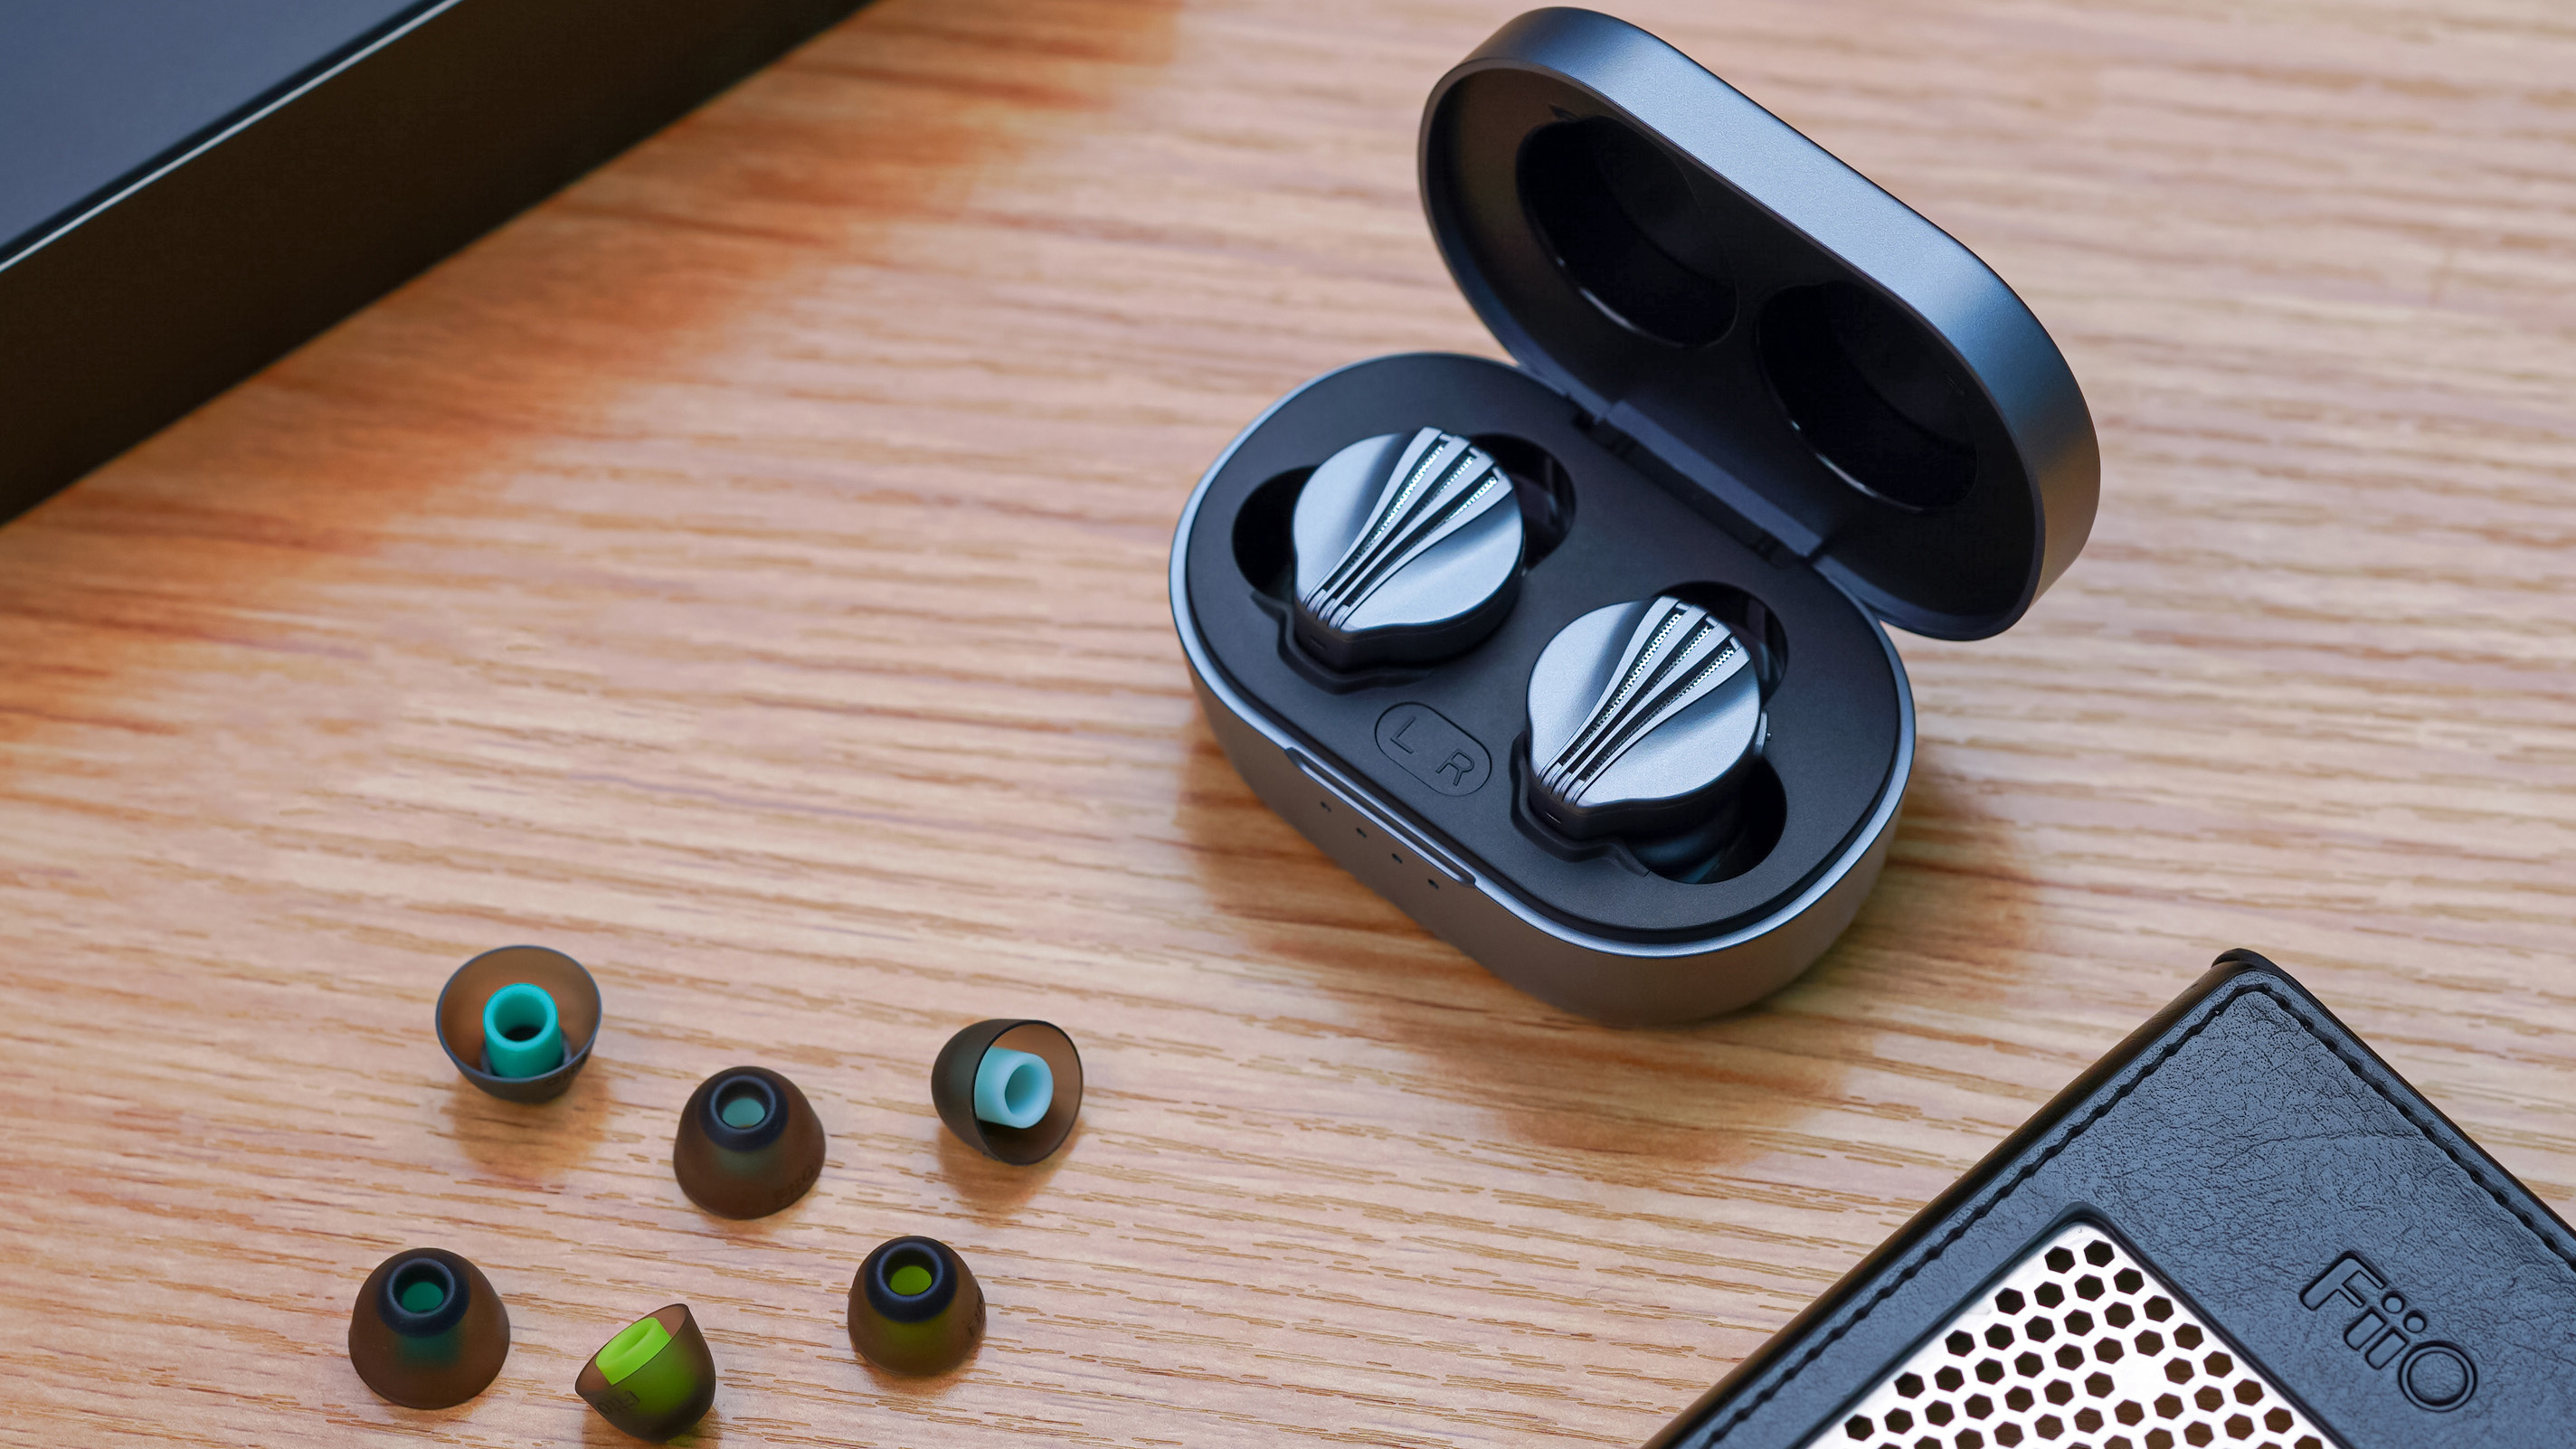 Fiio FW3 earbuds on a table